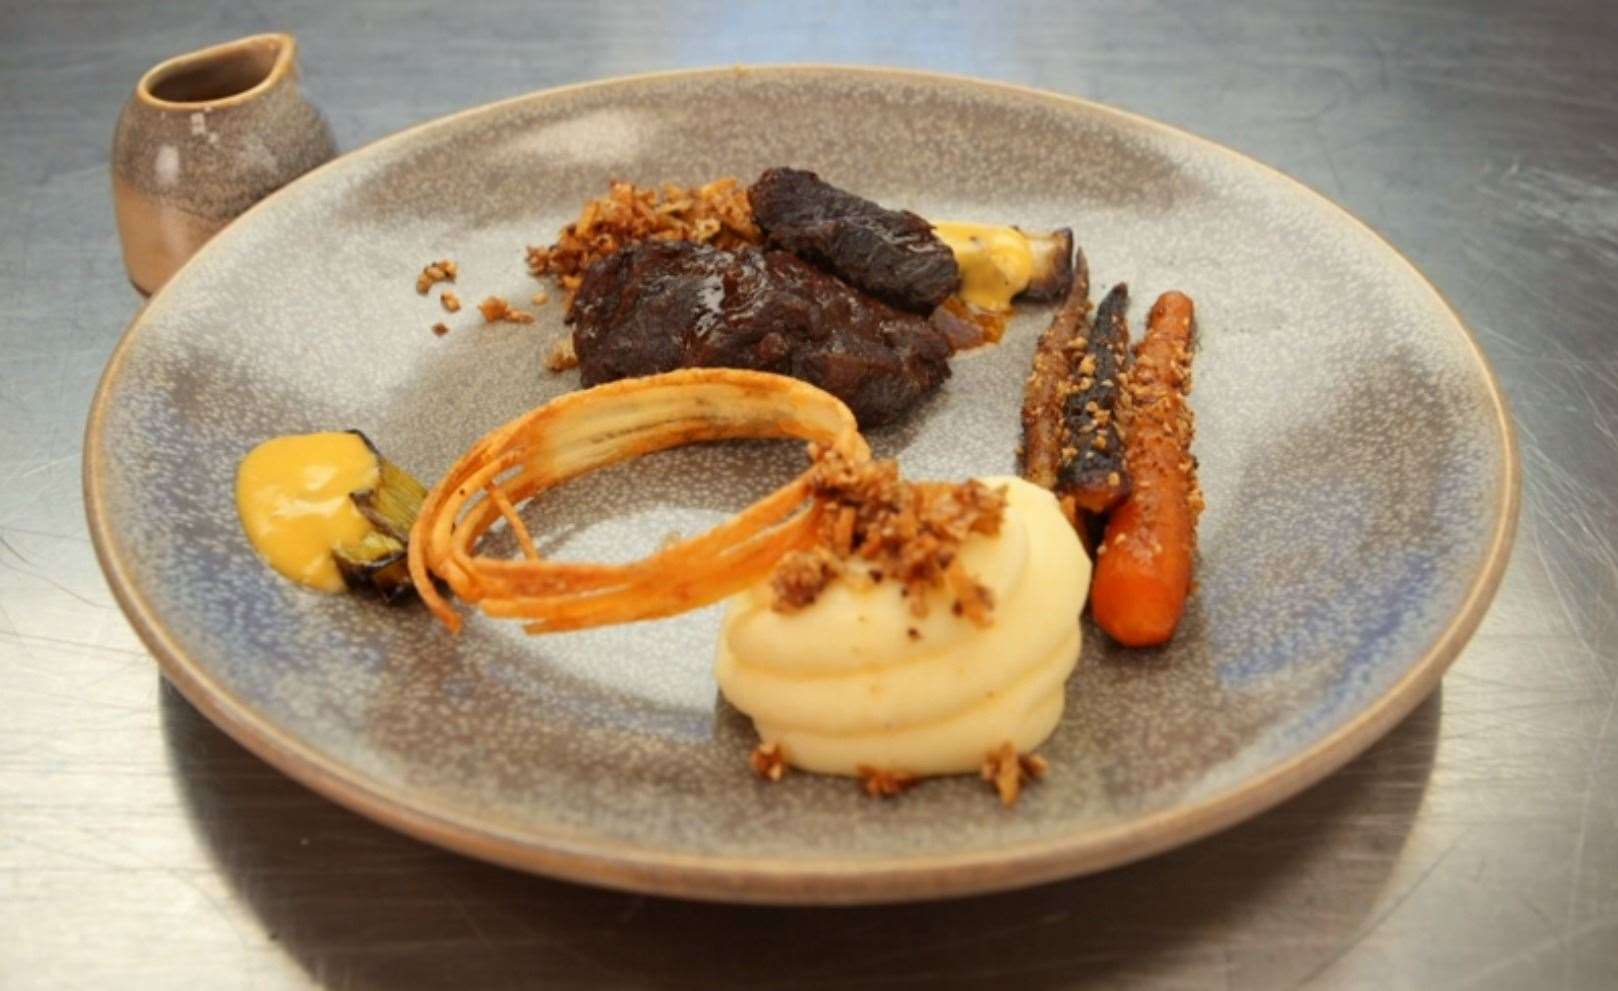 Sarah's final dish for the semi-finals